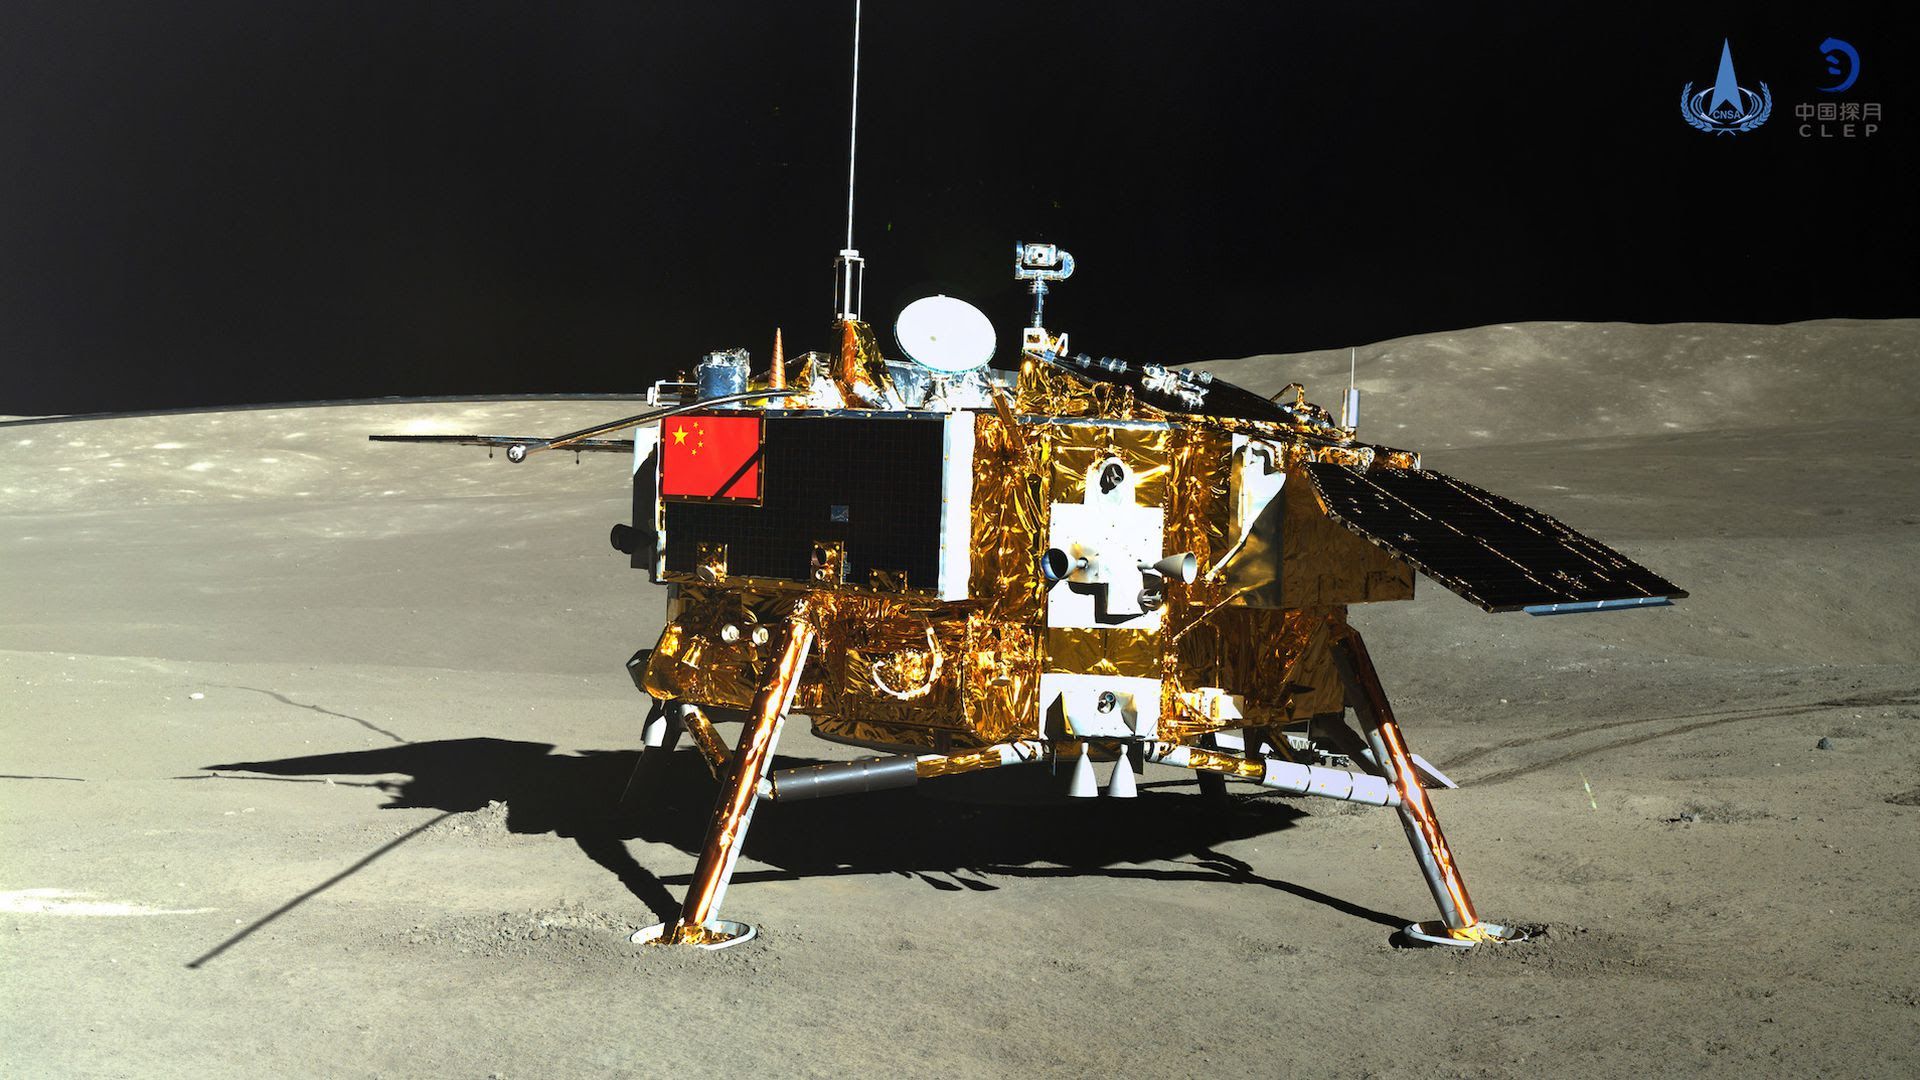 A photo of the Chinese lunar probe, Chang'e-4